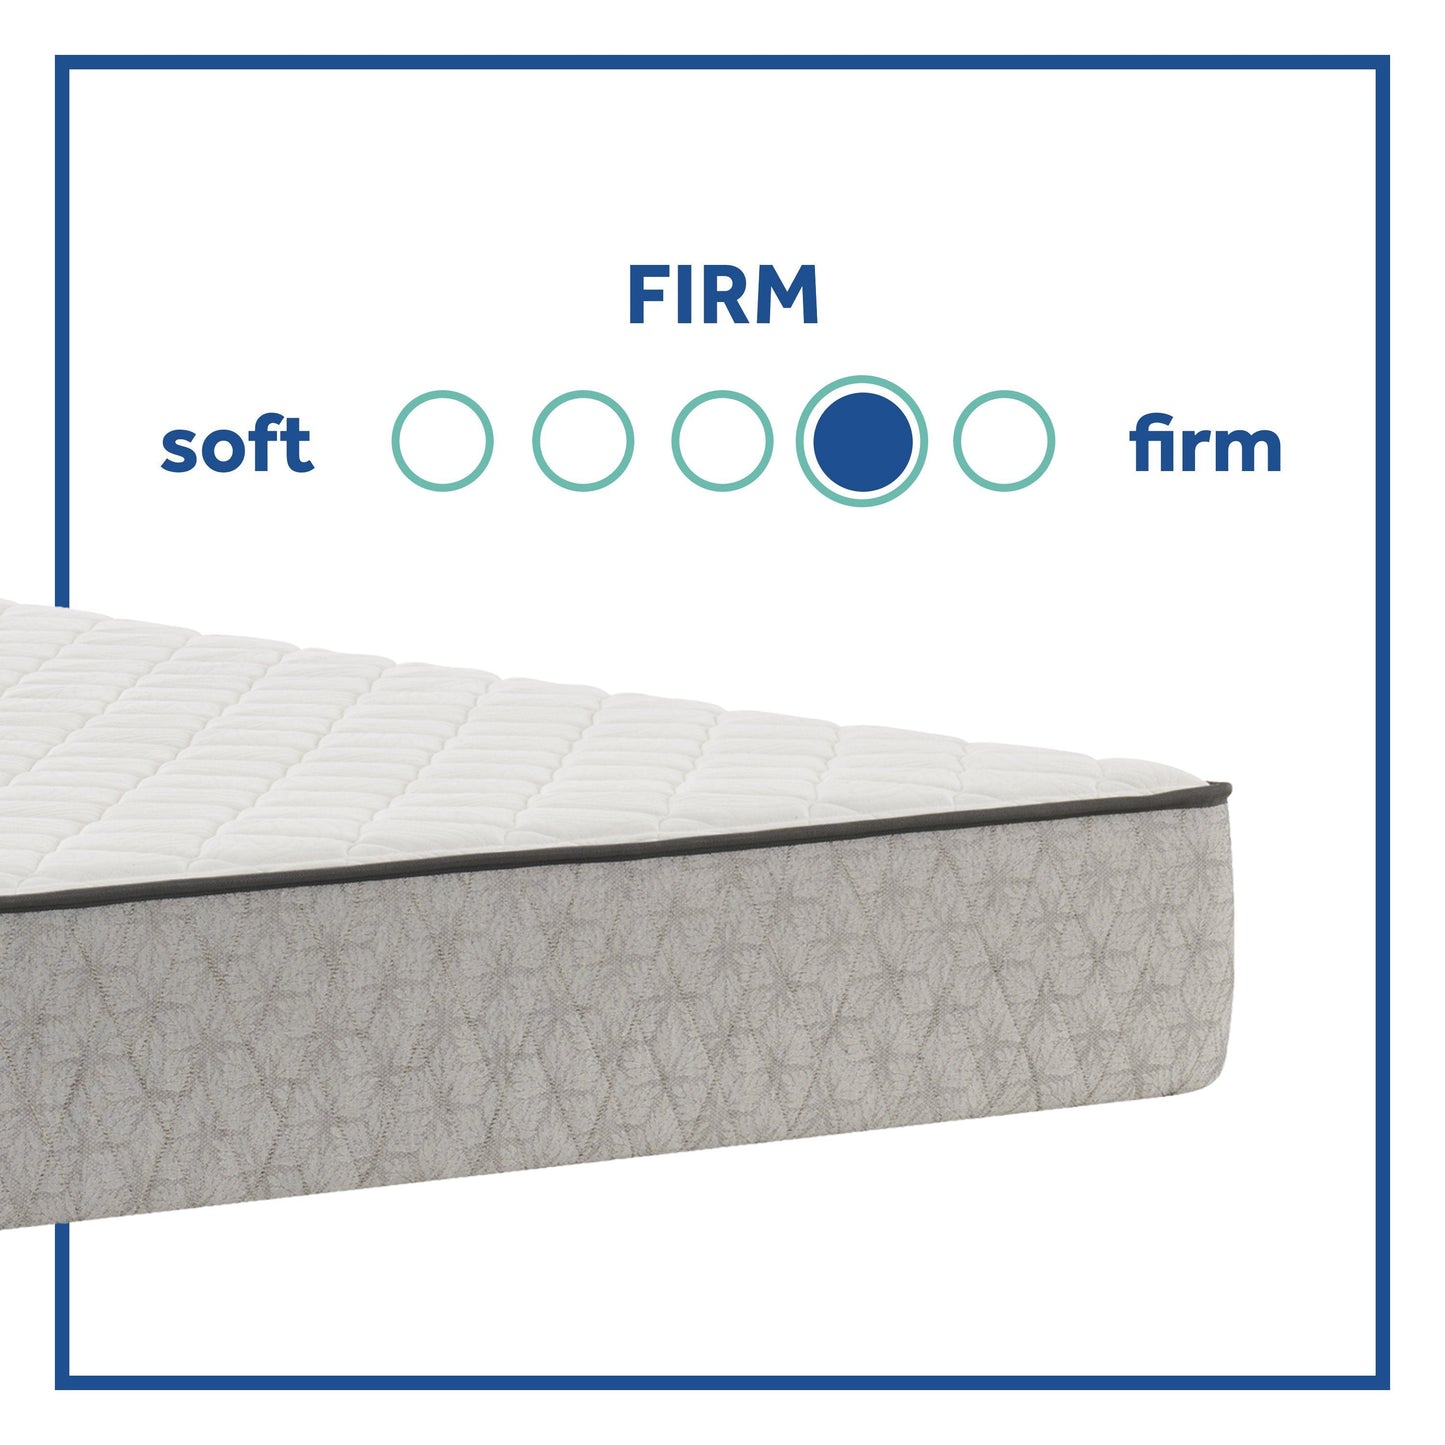 Sealy Barchester Firm Mattress Comfort Guide